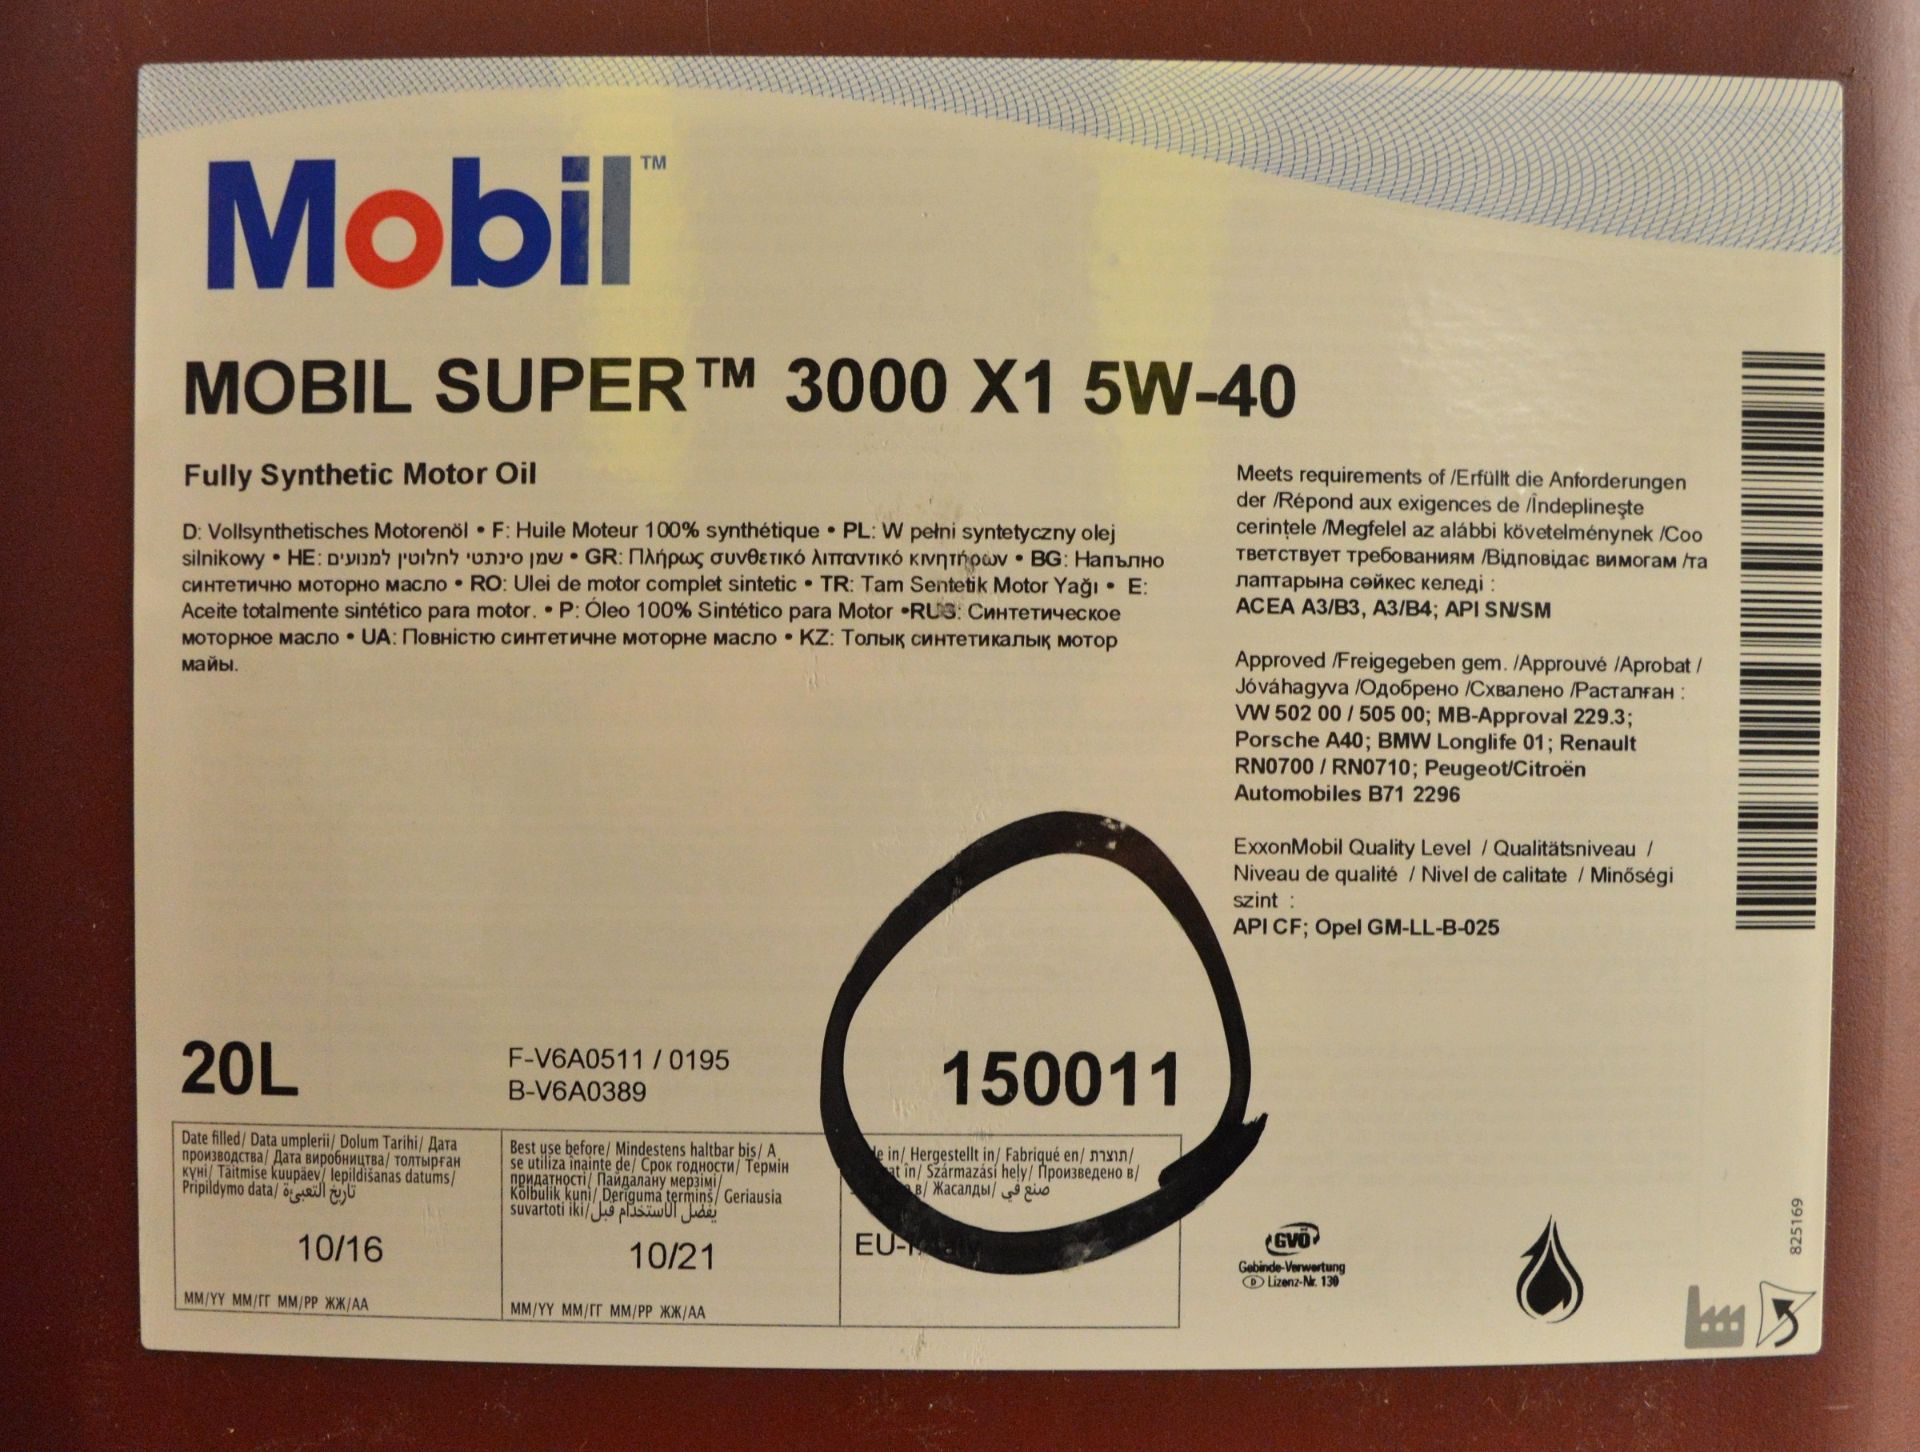 20L Mobil Super 3000 X1 5W-40 Fully Synthetic Motor Oil - Image 2 of 2